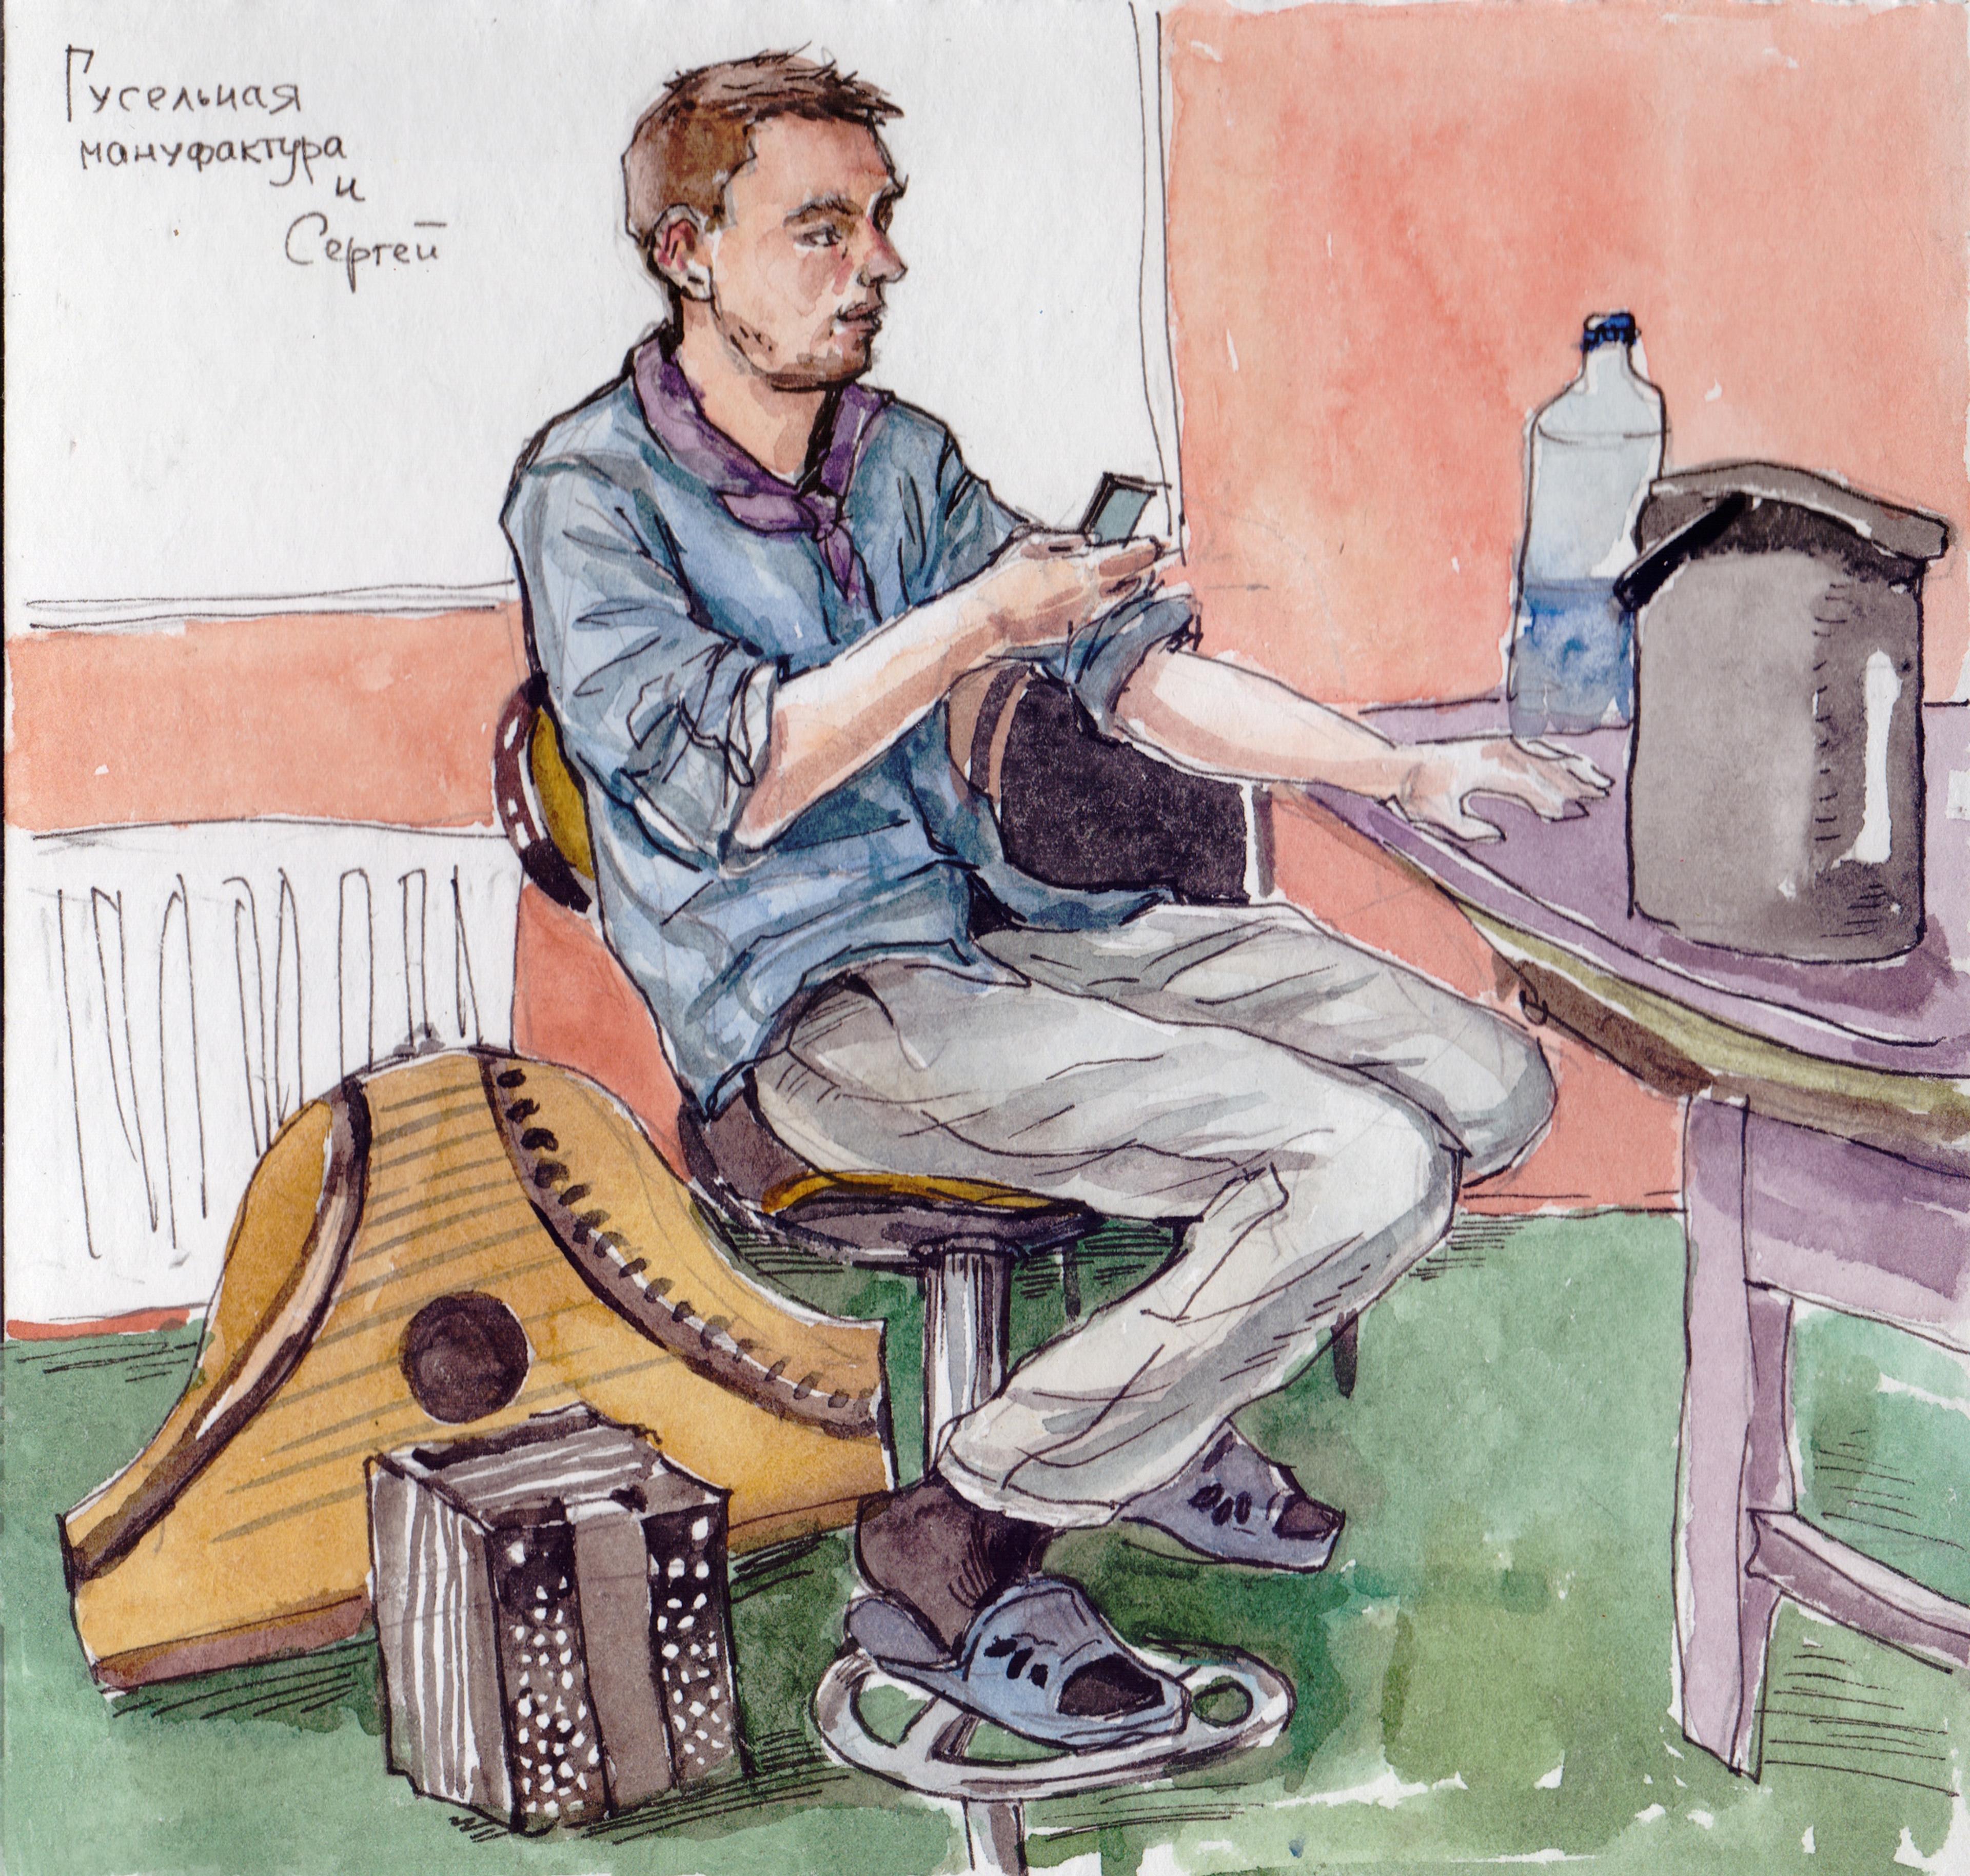 a watercolour sketch of the man sitting on the chair, checking a phone, musical instruments on the ground besides him